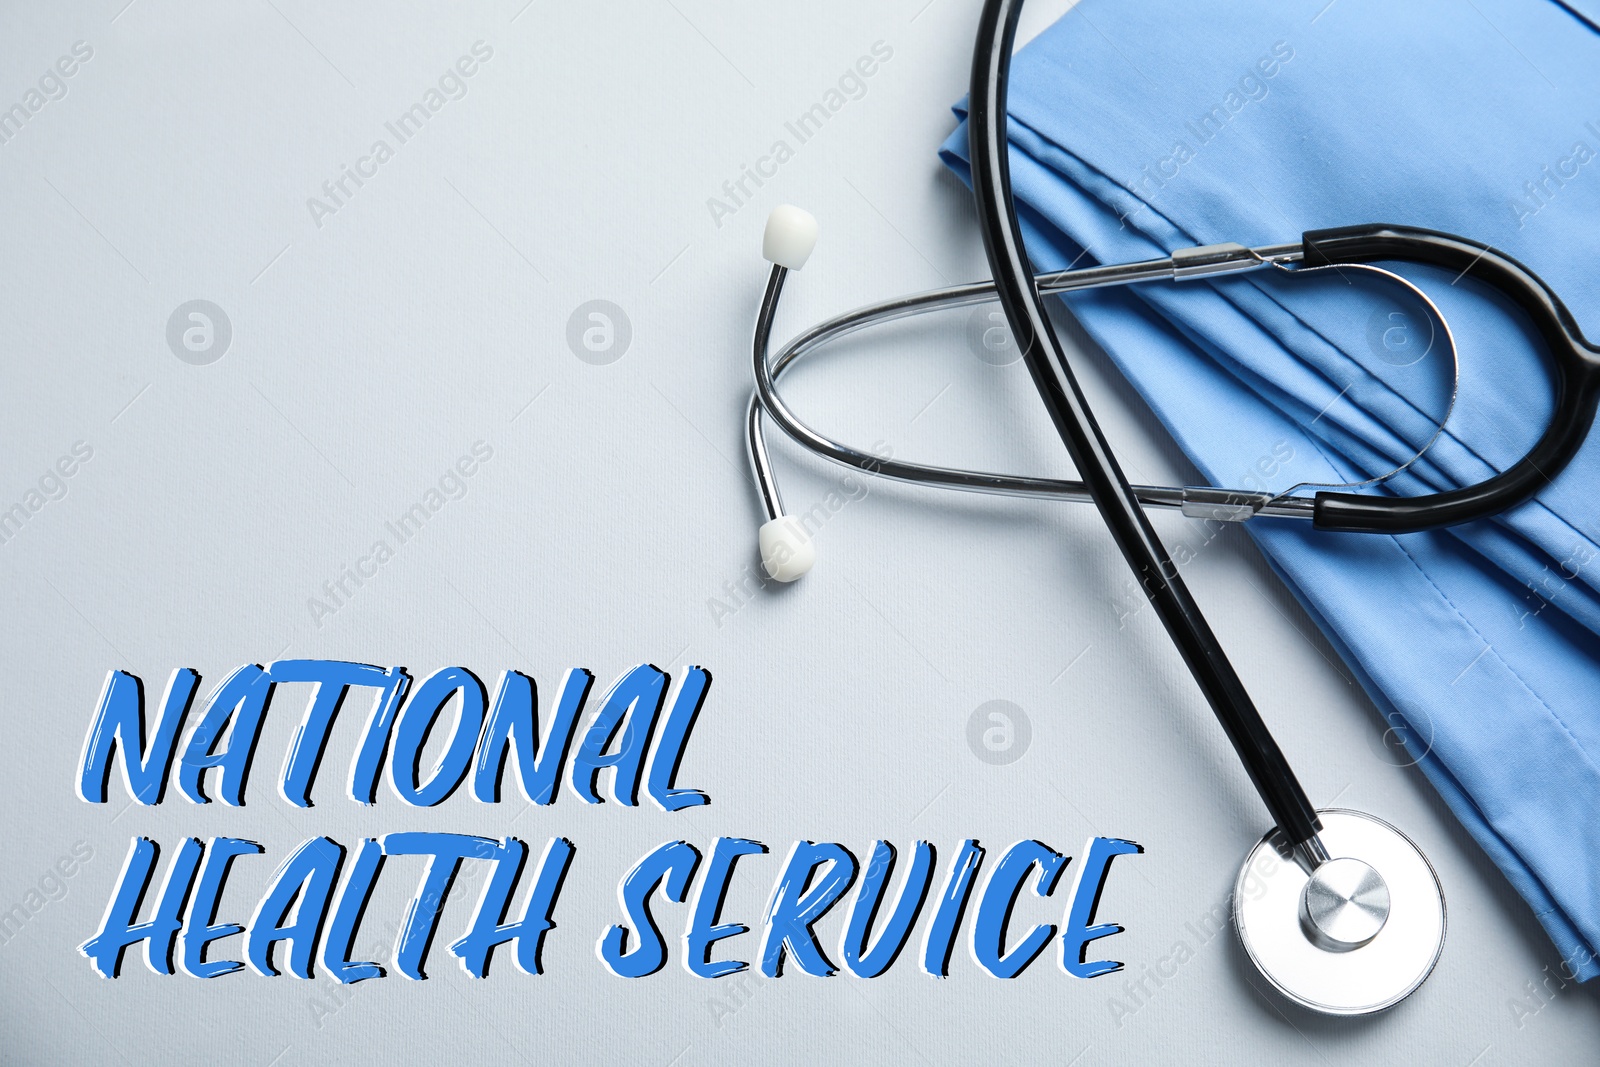 Image of National health service (NHS). Stethoscope, scrubs and text on light grey background, top view